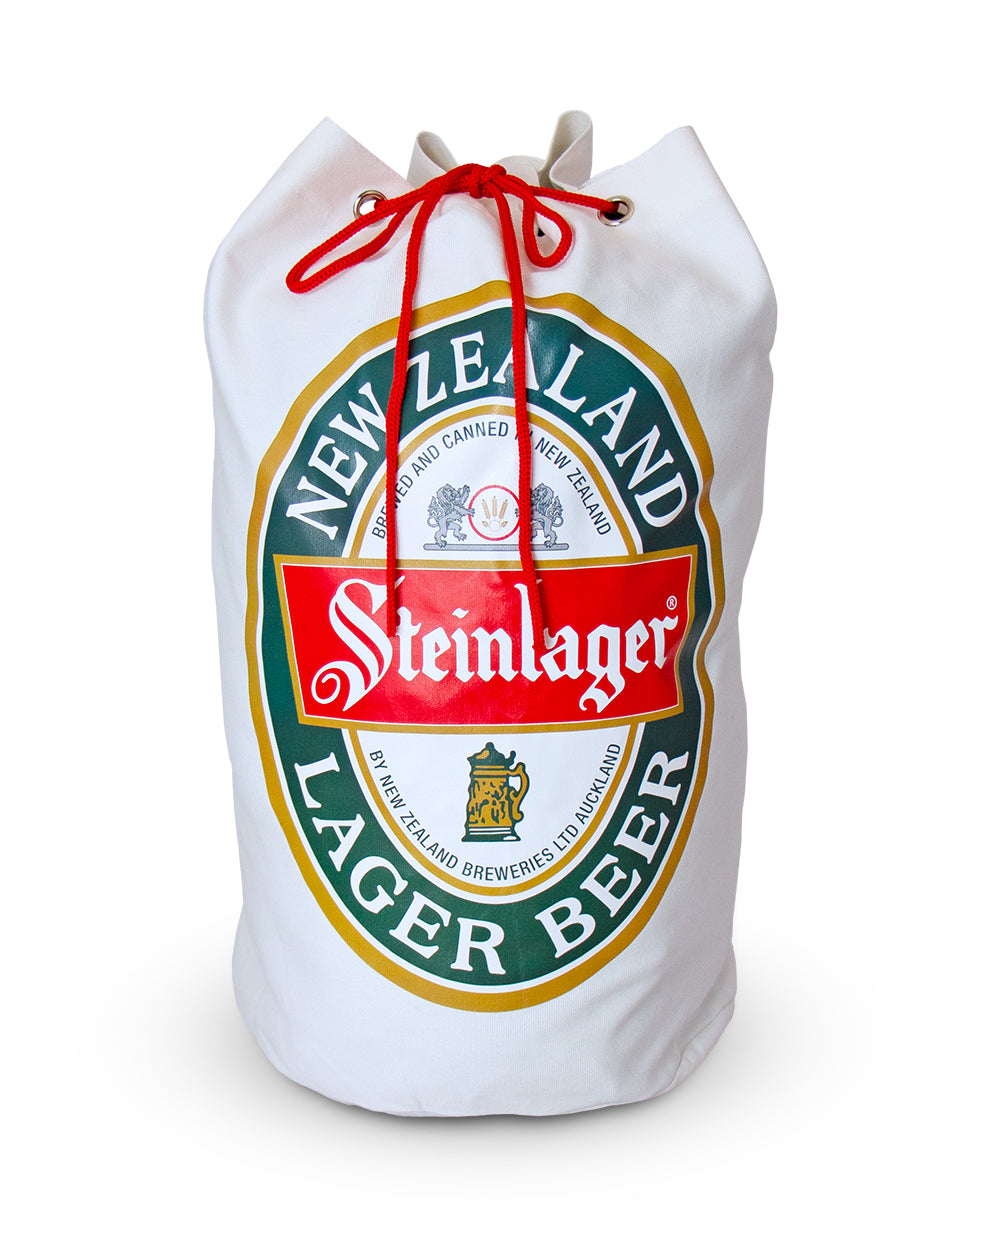 Steinlager White Can Duffel Bag -  Beer Gear Apparel & Merchandise - Speights - Lion Red - VB - Tokyo Dy merch